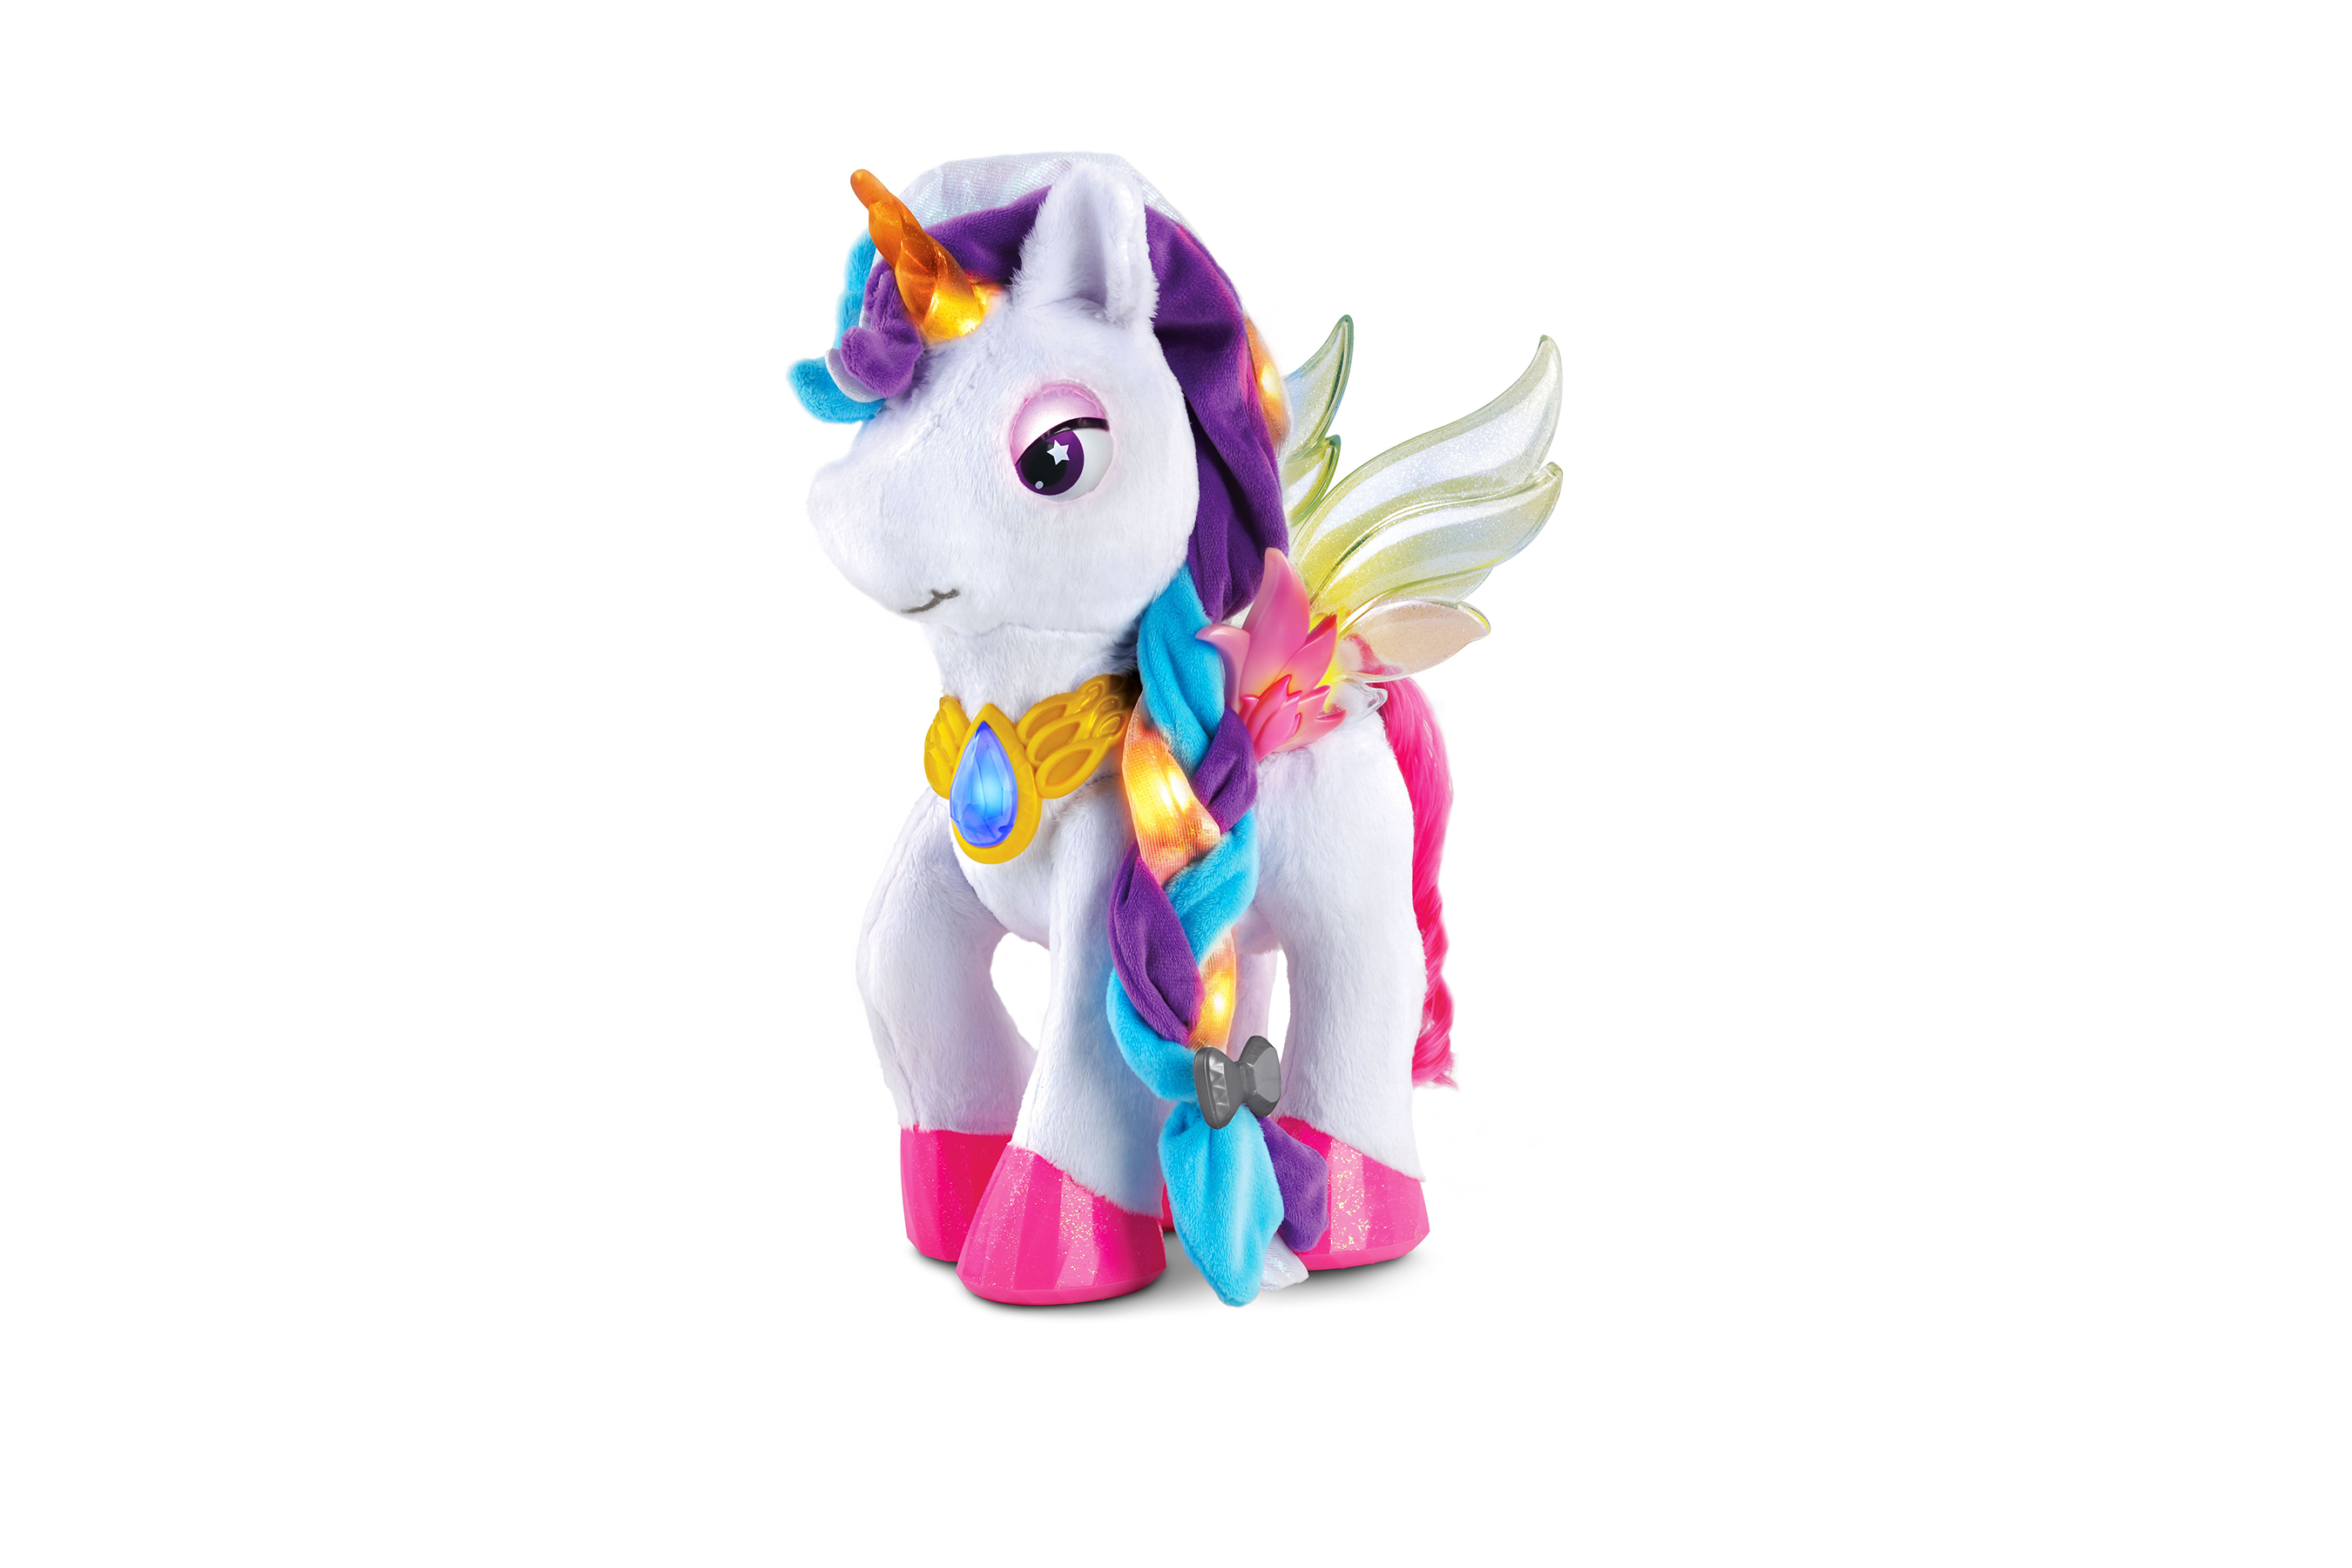 Myla the Magical Unicorn™, VTech's Colorful Addition to the Robotics Toy Category, Available Now